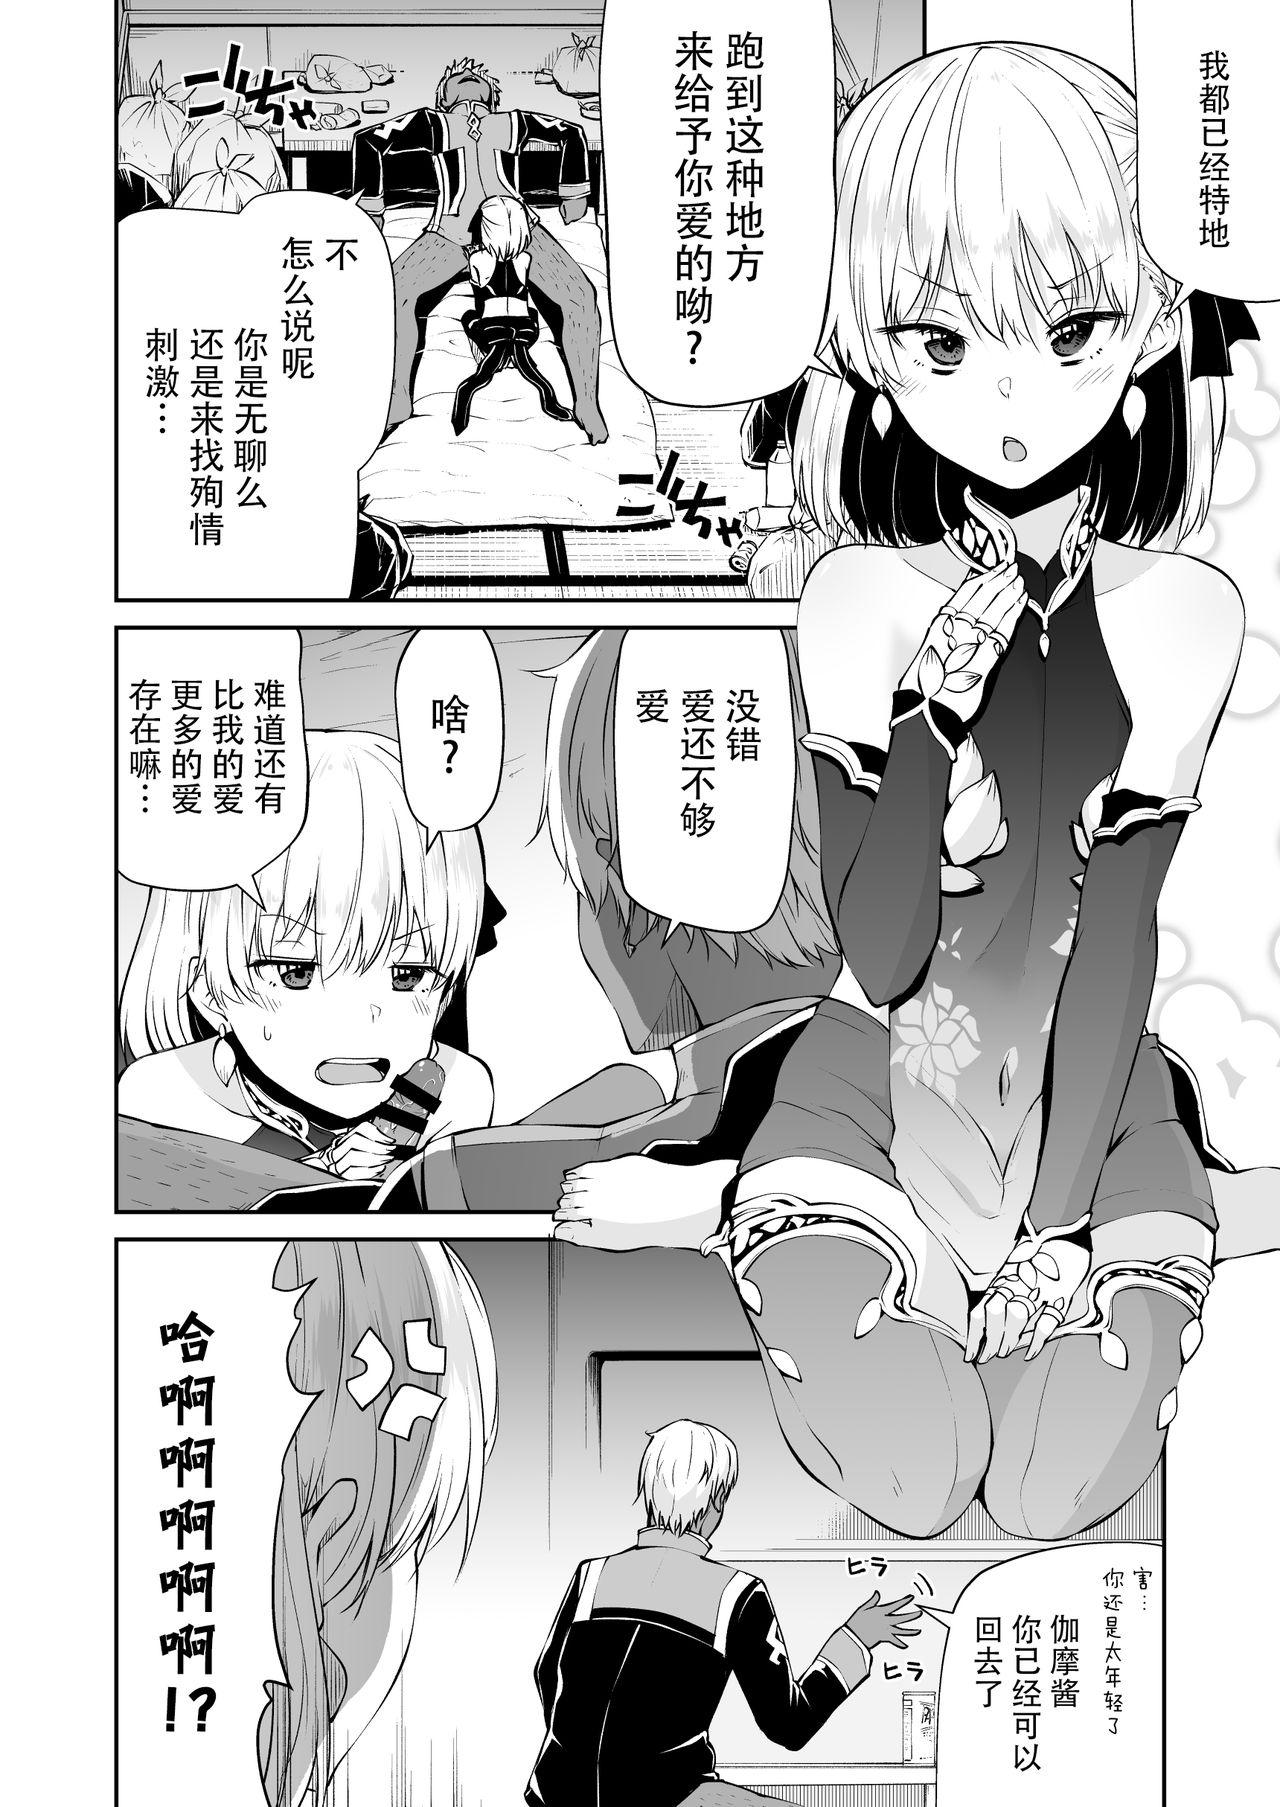 Assfucking [Kitsuneya (Leafy)] Kama-chan to Love-prescription | 小伽摩的爱的処方药 (Fate/Grand Order) [Chinese] [牛肝菌汉化] [Digital] - Fate grand order Colombiana - Page 5